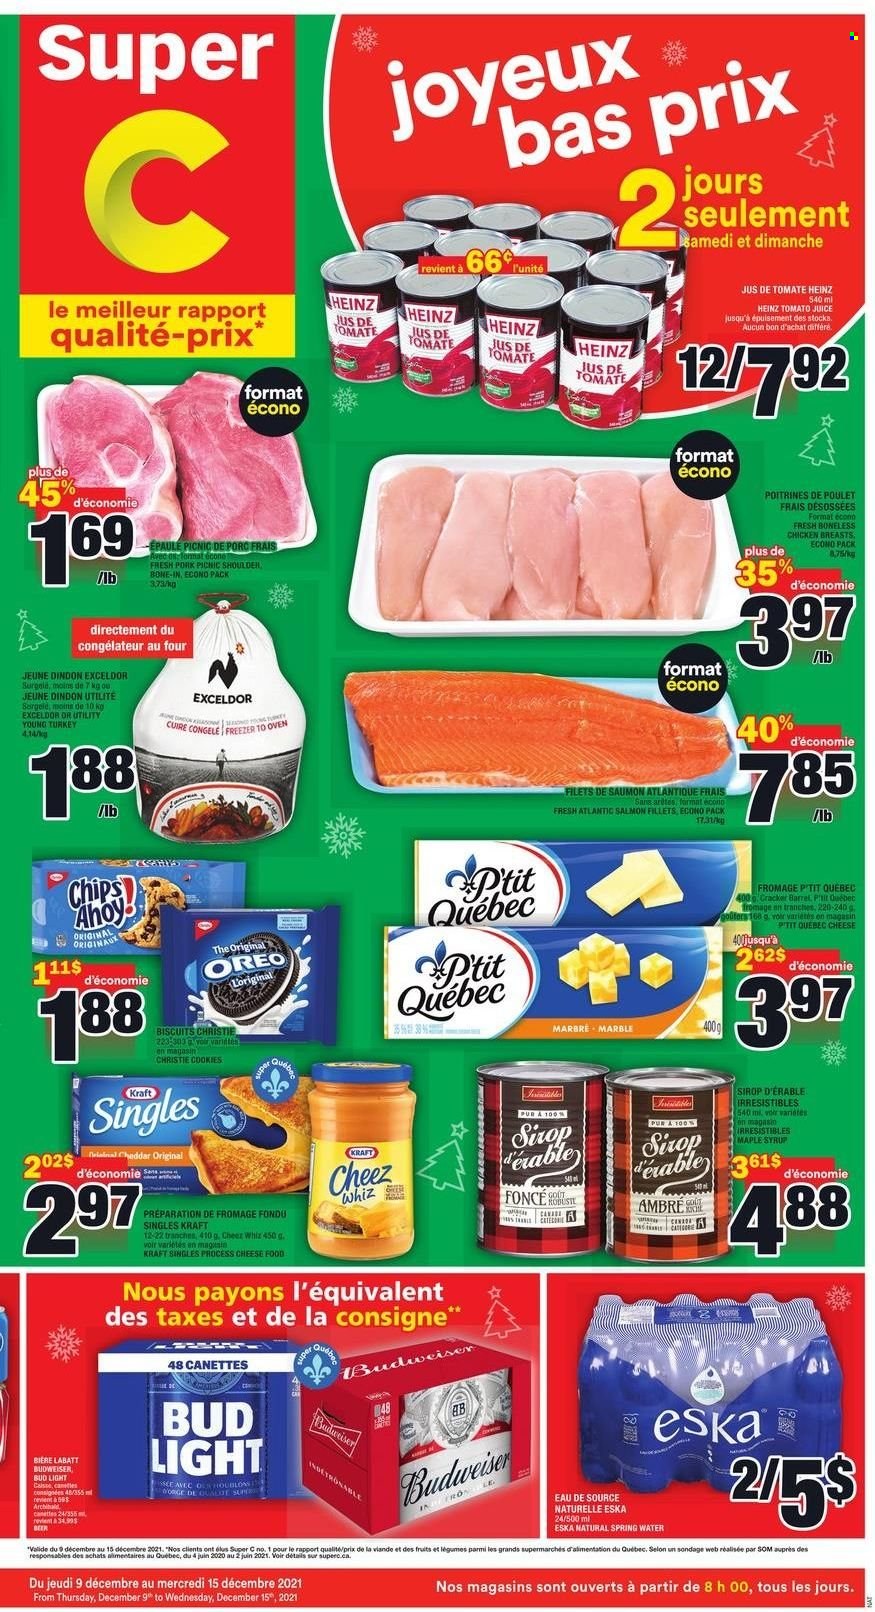 thumbnail - Super C Flyer - December 09, 2021 - December 15, 2021 - Sales products - salmon, salmon fillet, Kraft®, sandwich slices, cheese, Kraft Singles, cookies, crackers, Heinz, maple syrup, syrup, tomato juice, juice, spring water, beer, Bud Light, chicken breasts, Oreo, Budweiser, chips. Page 1.